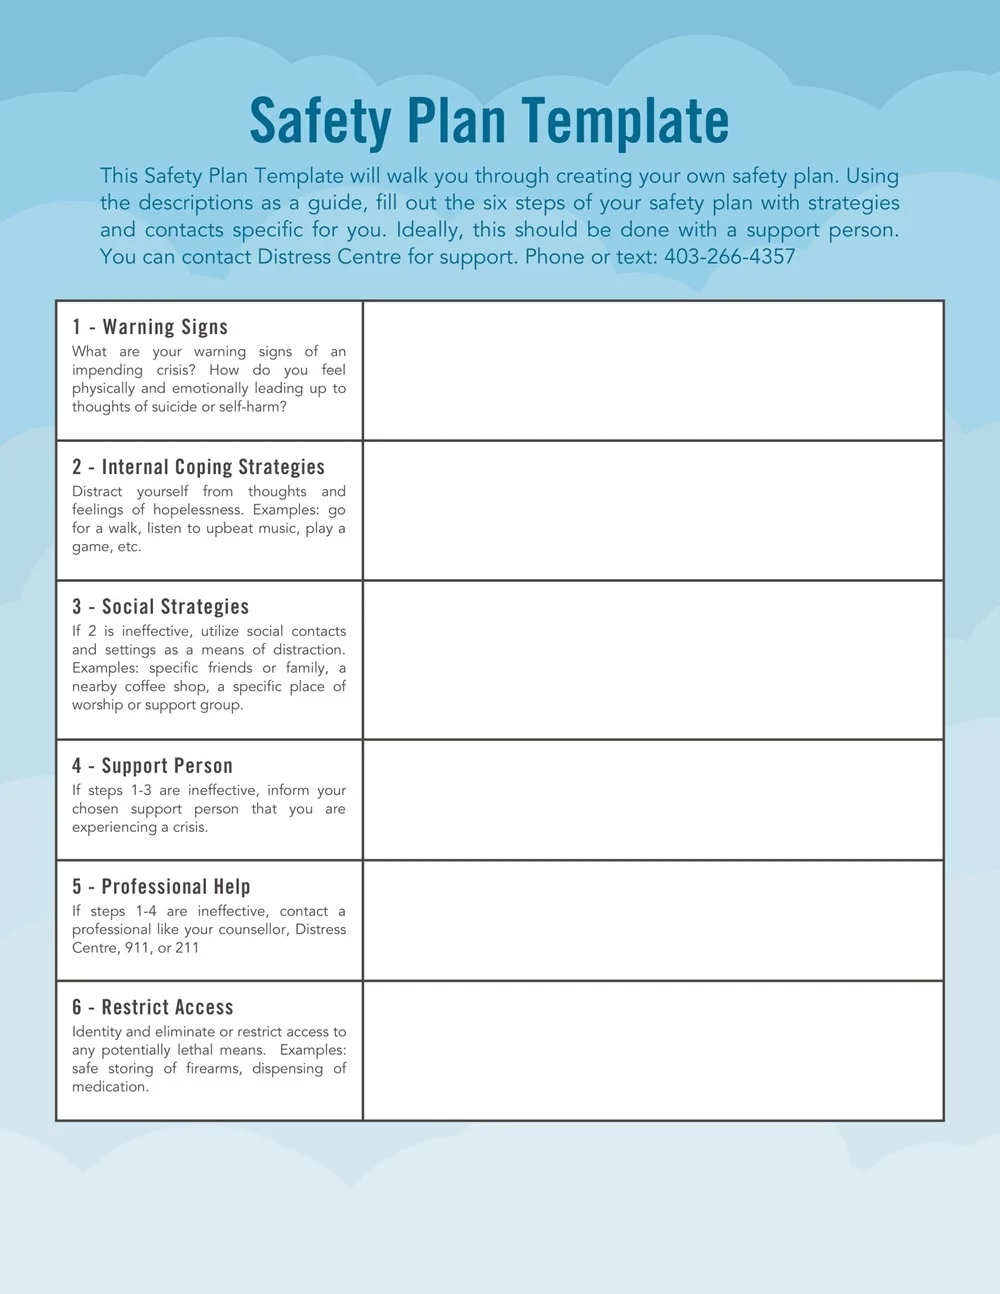 Safety Planning Template PDF